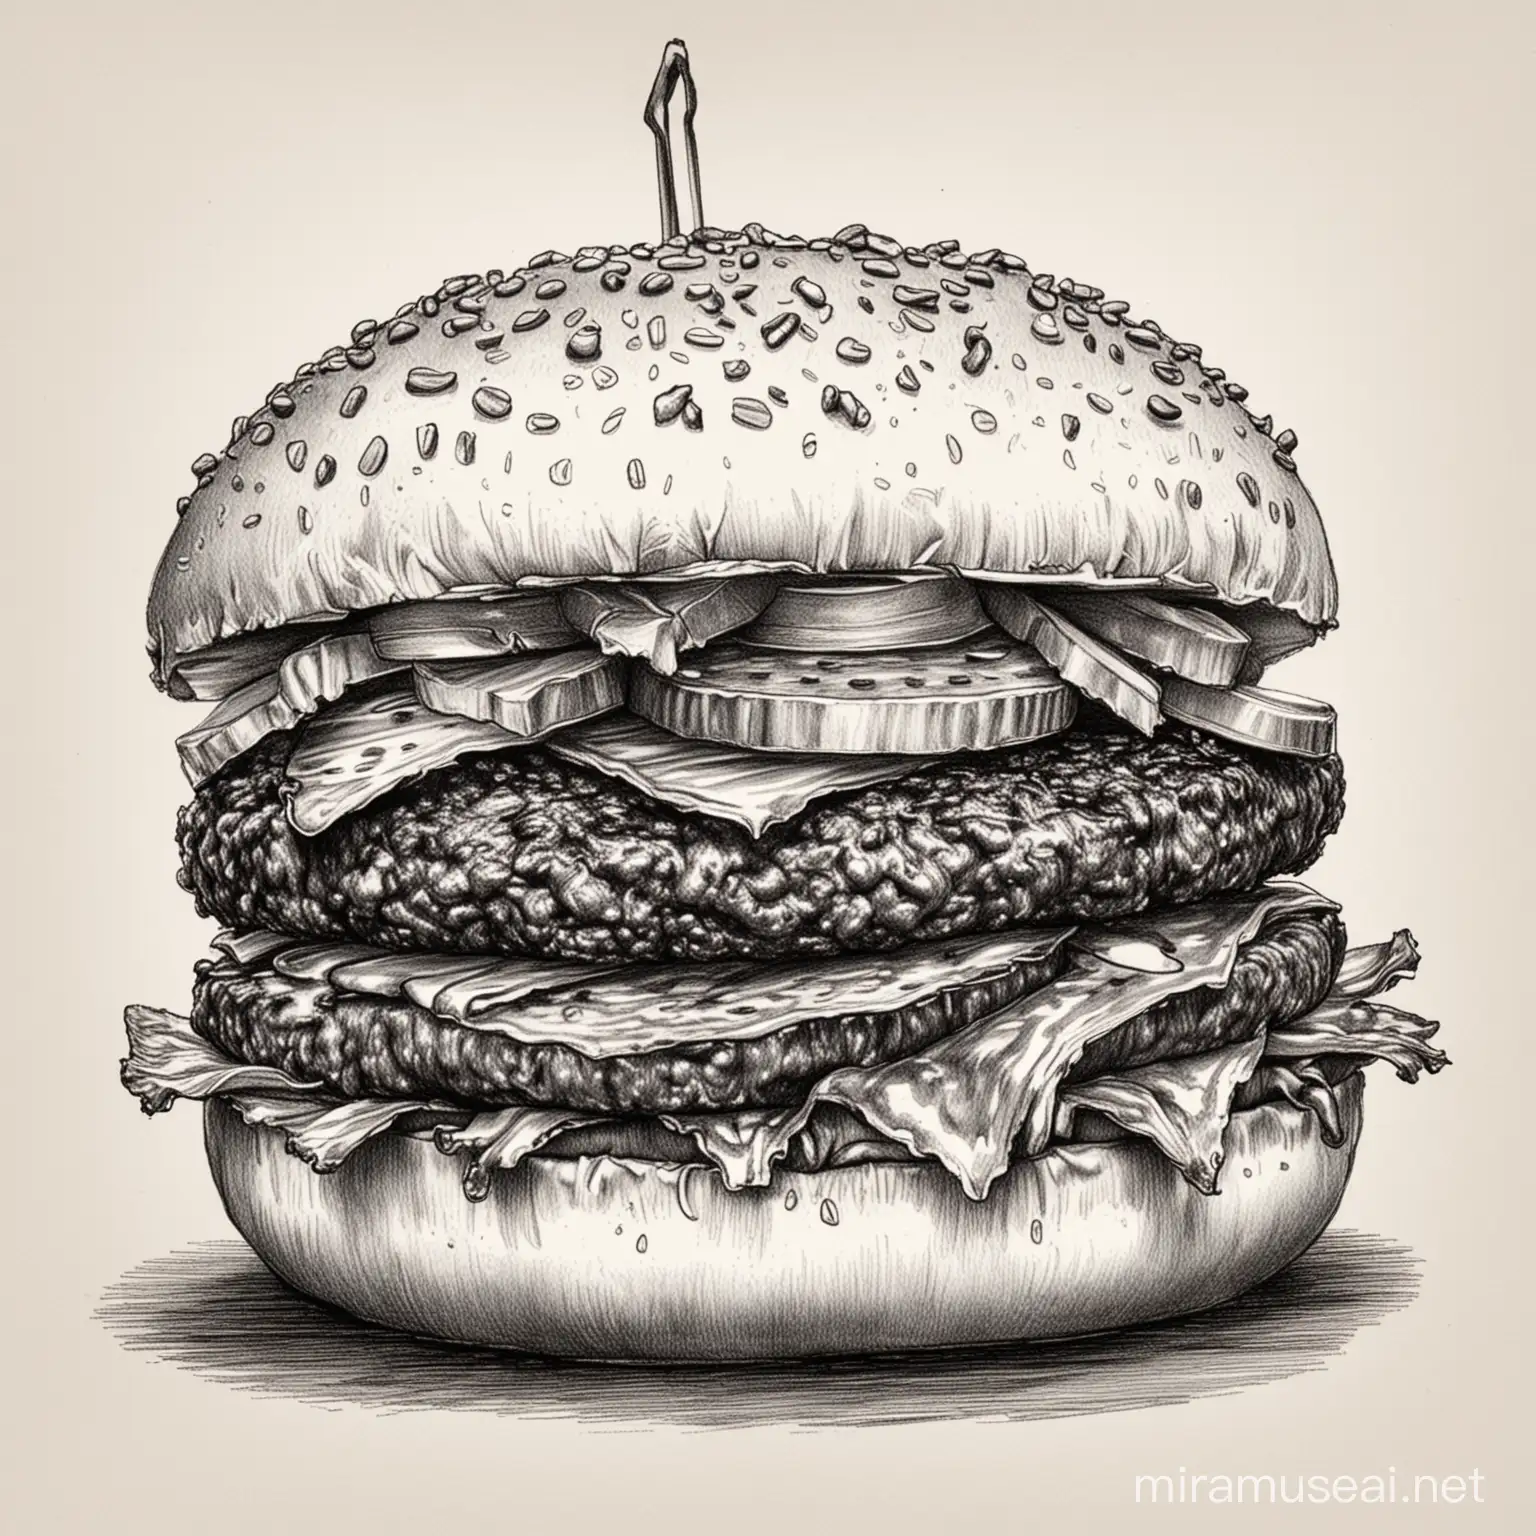 Amateur Ink Drawing of a Beef Burger